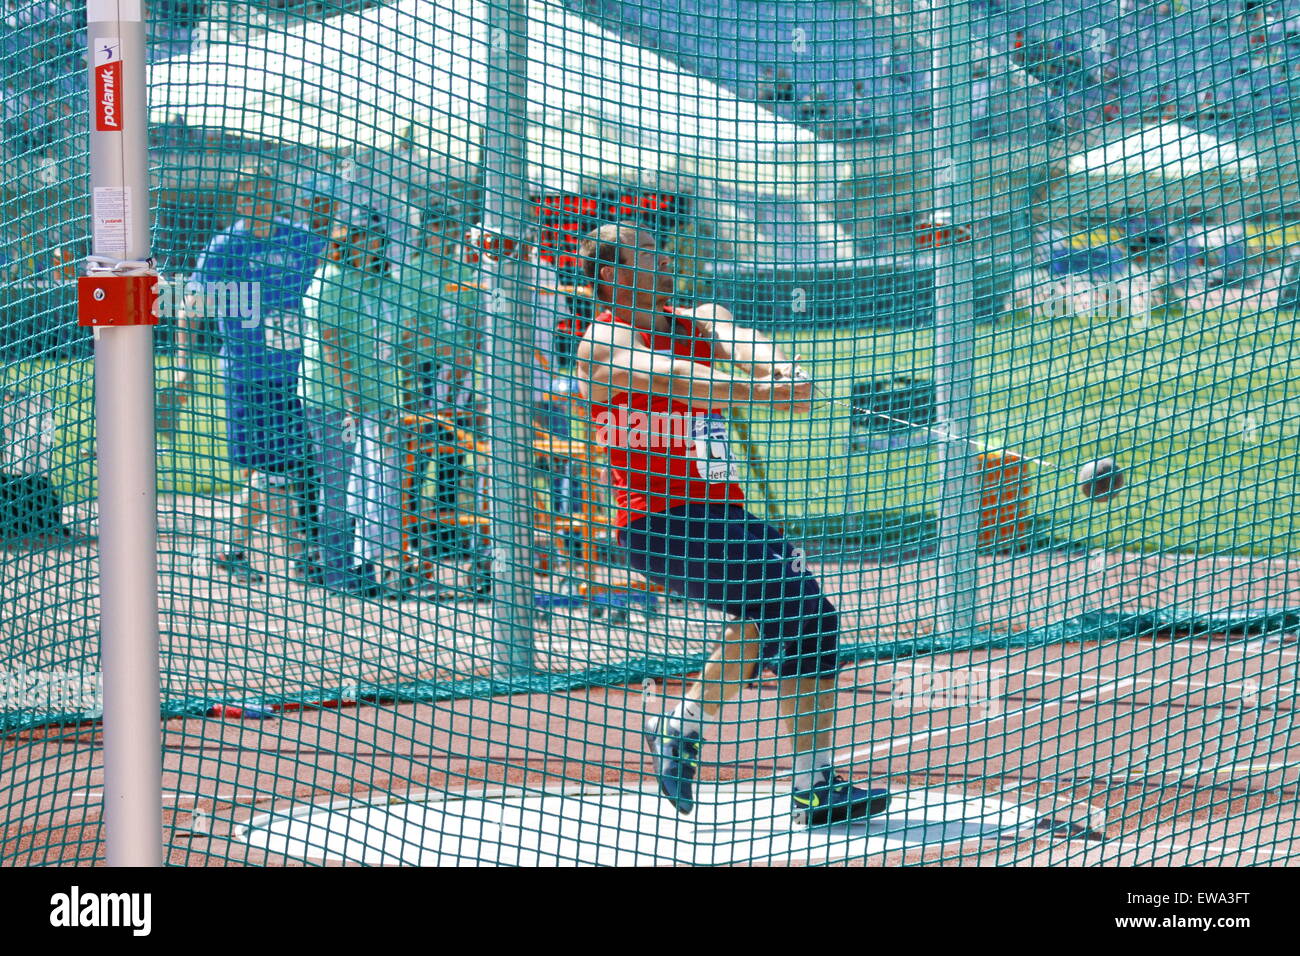 Heraklion, Greece. 20th June, 2015. Czech hammer thrower Lukáš Melich is pictured in action at the 2015 European Athletics Team Championships 1st League. The first day of the 2015 European Athletics Team Championships First League saw 21 events with 1 athlete from each of the 12 participating countries taking place in the Pankrition Stadium in Heraklion on Crete. © Michael Debets/Pacific Press/Alamy Live News Stock Photo